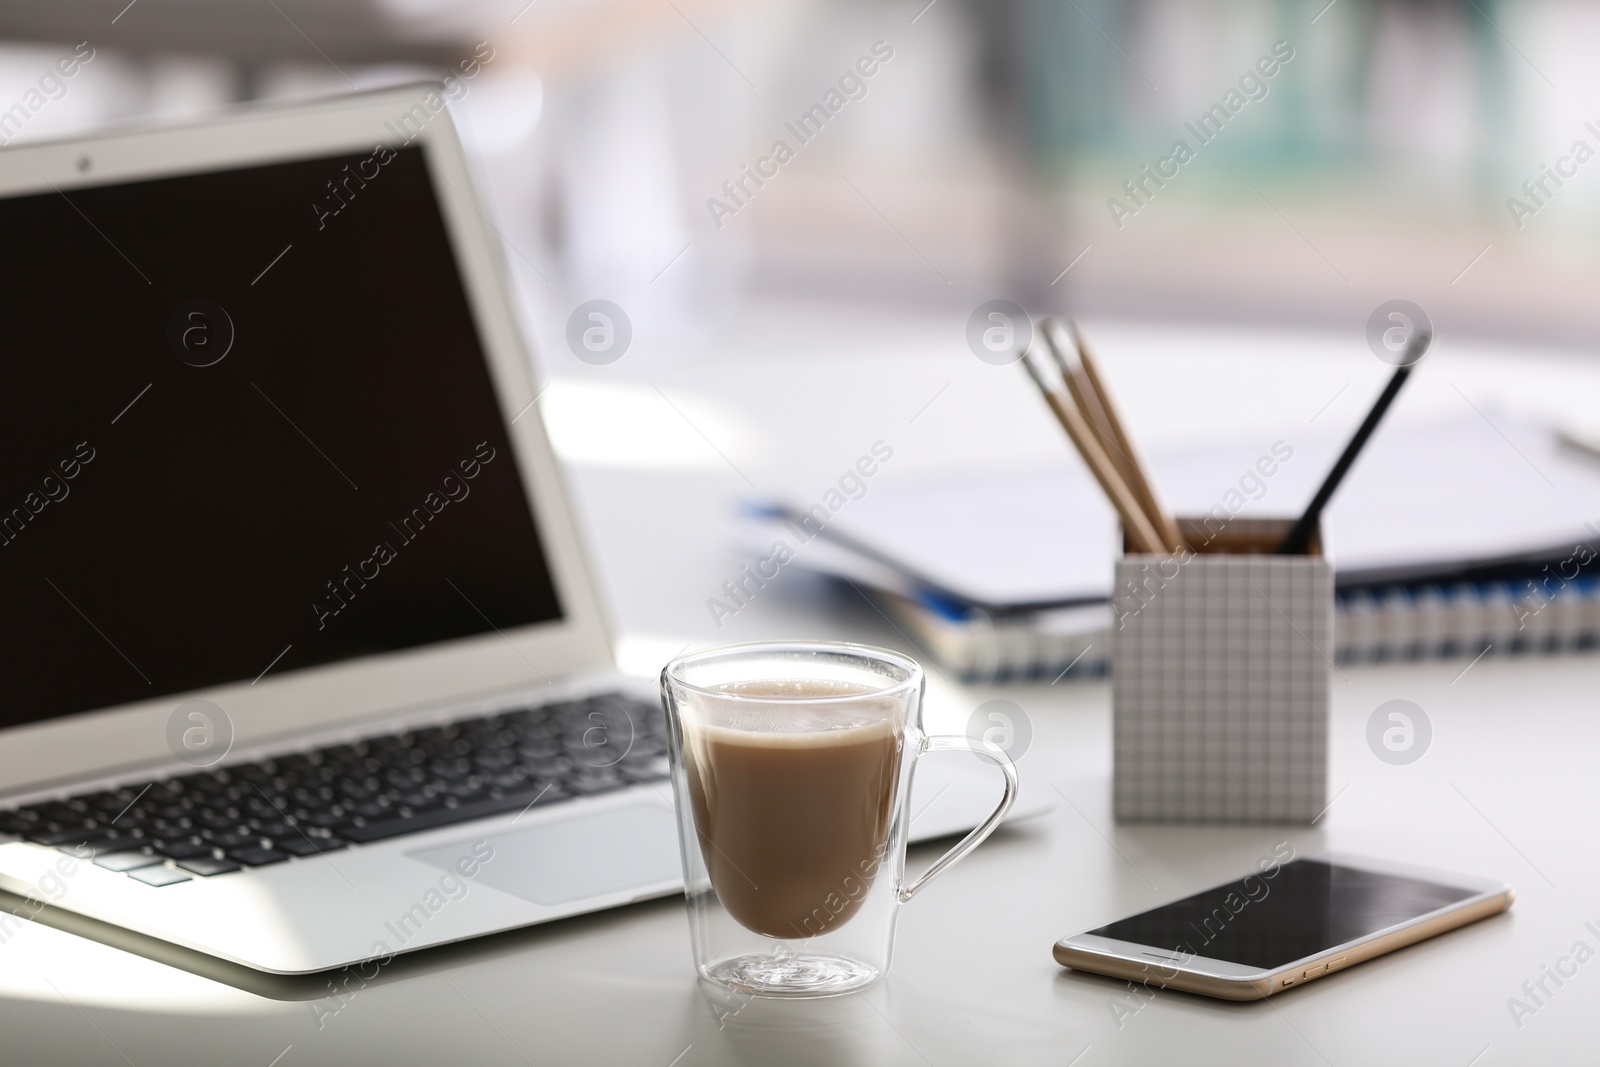 Photo of Cup of coffee, mobile phone and laptop on table